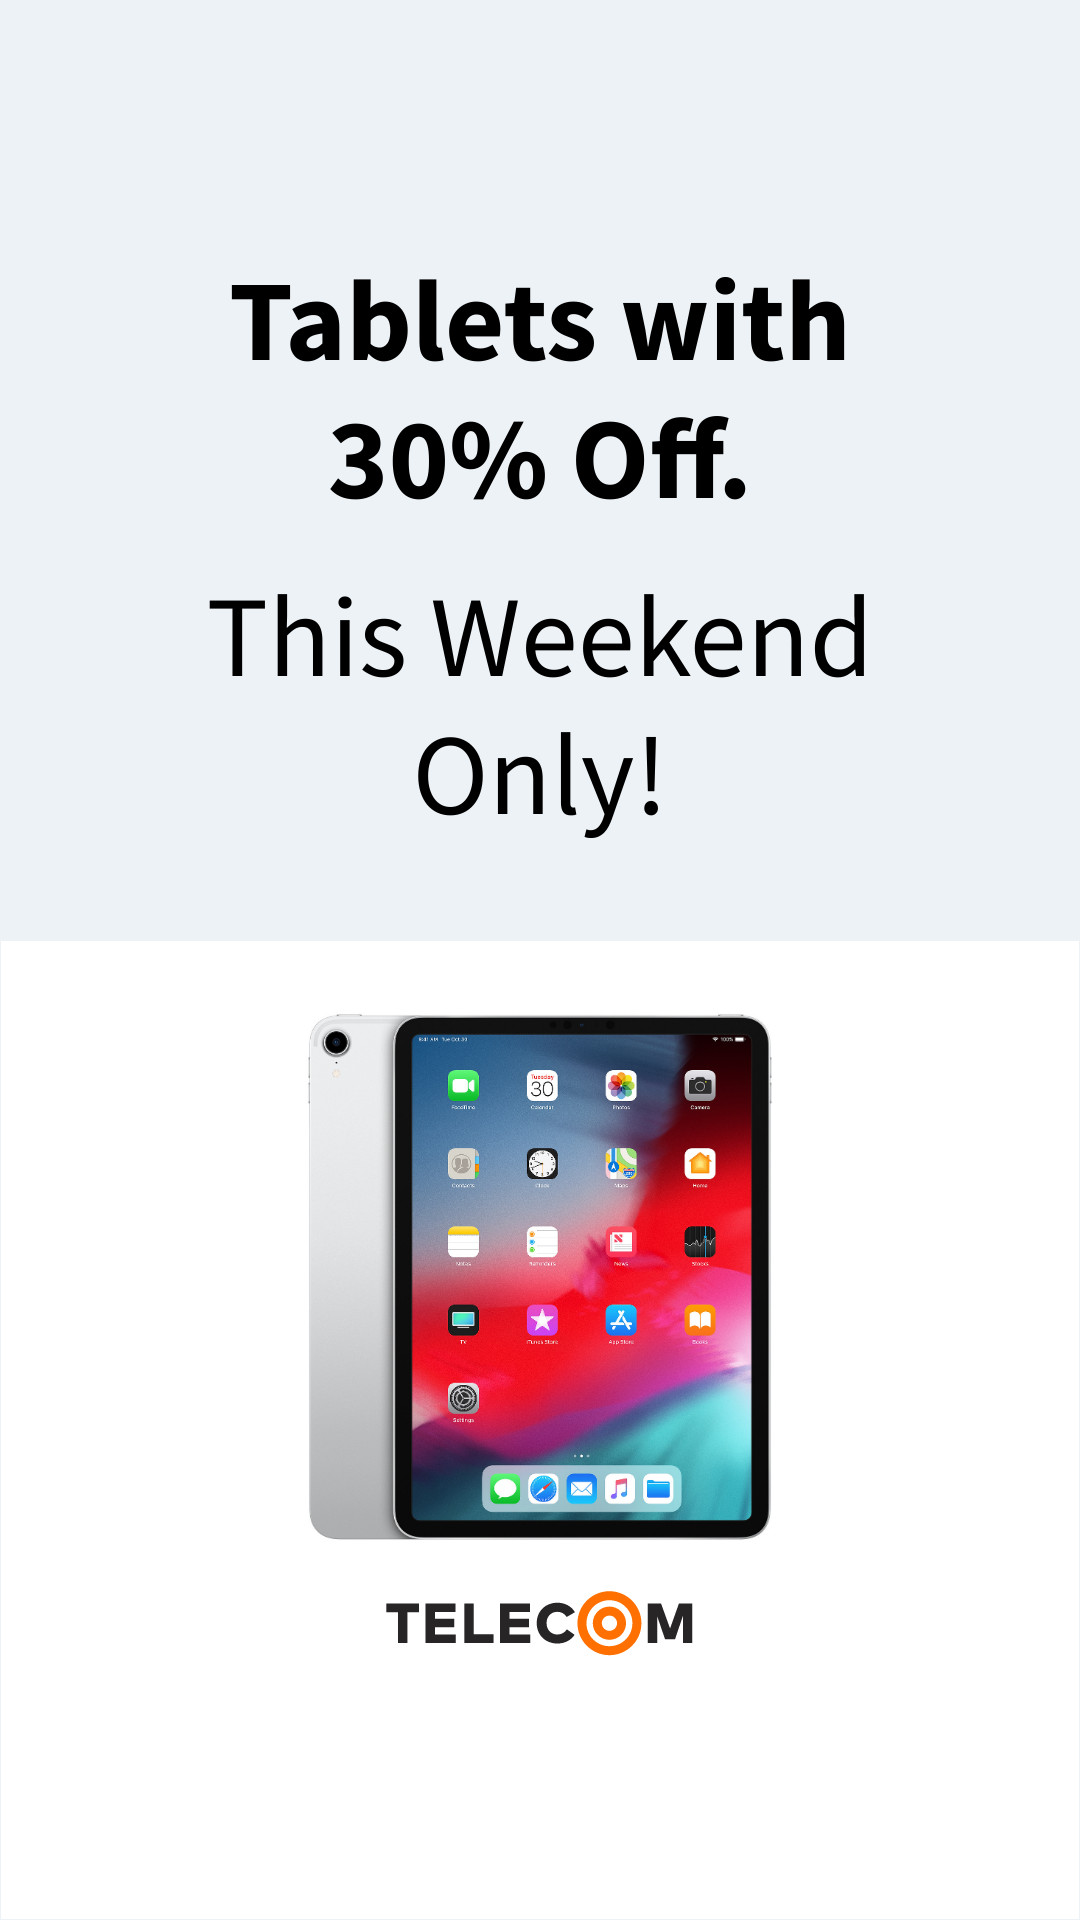 Weekend Only Telecom Tablets